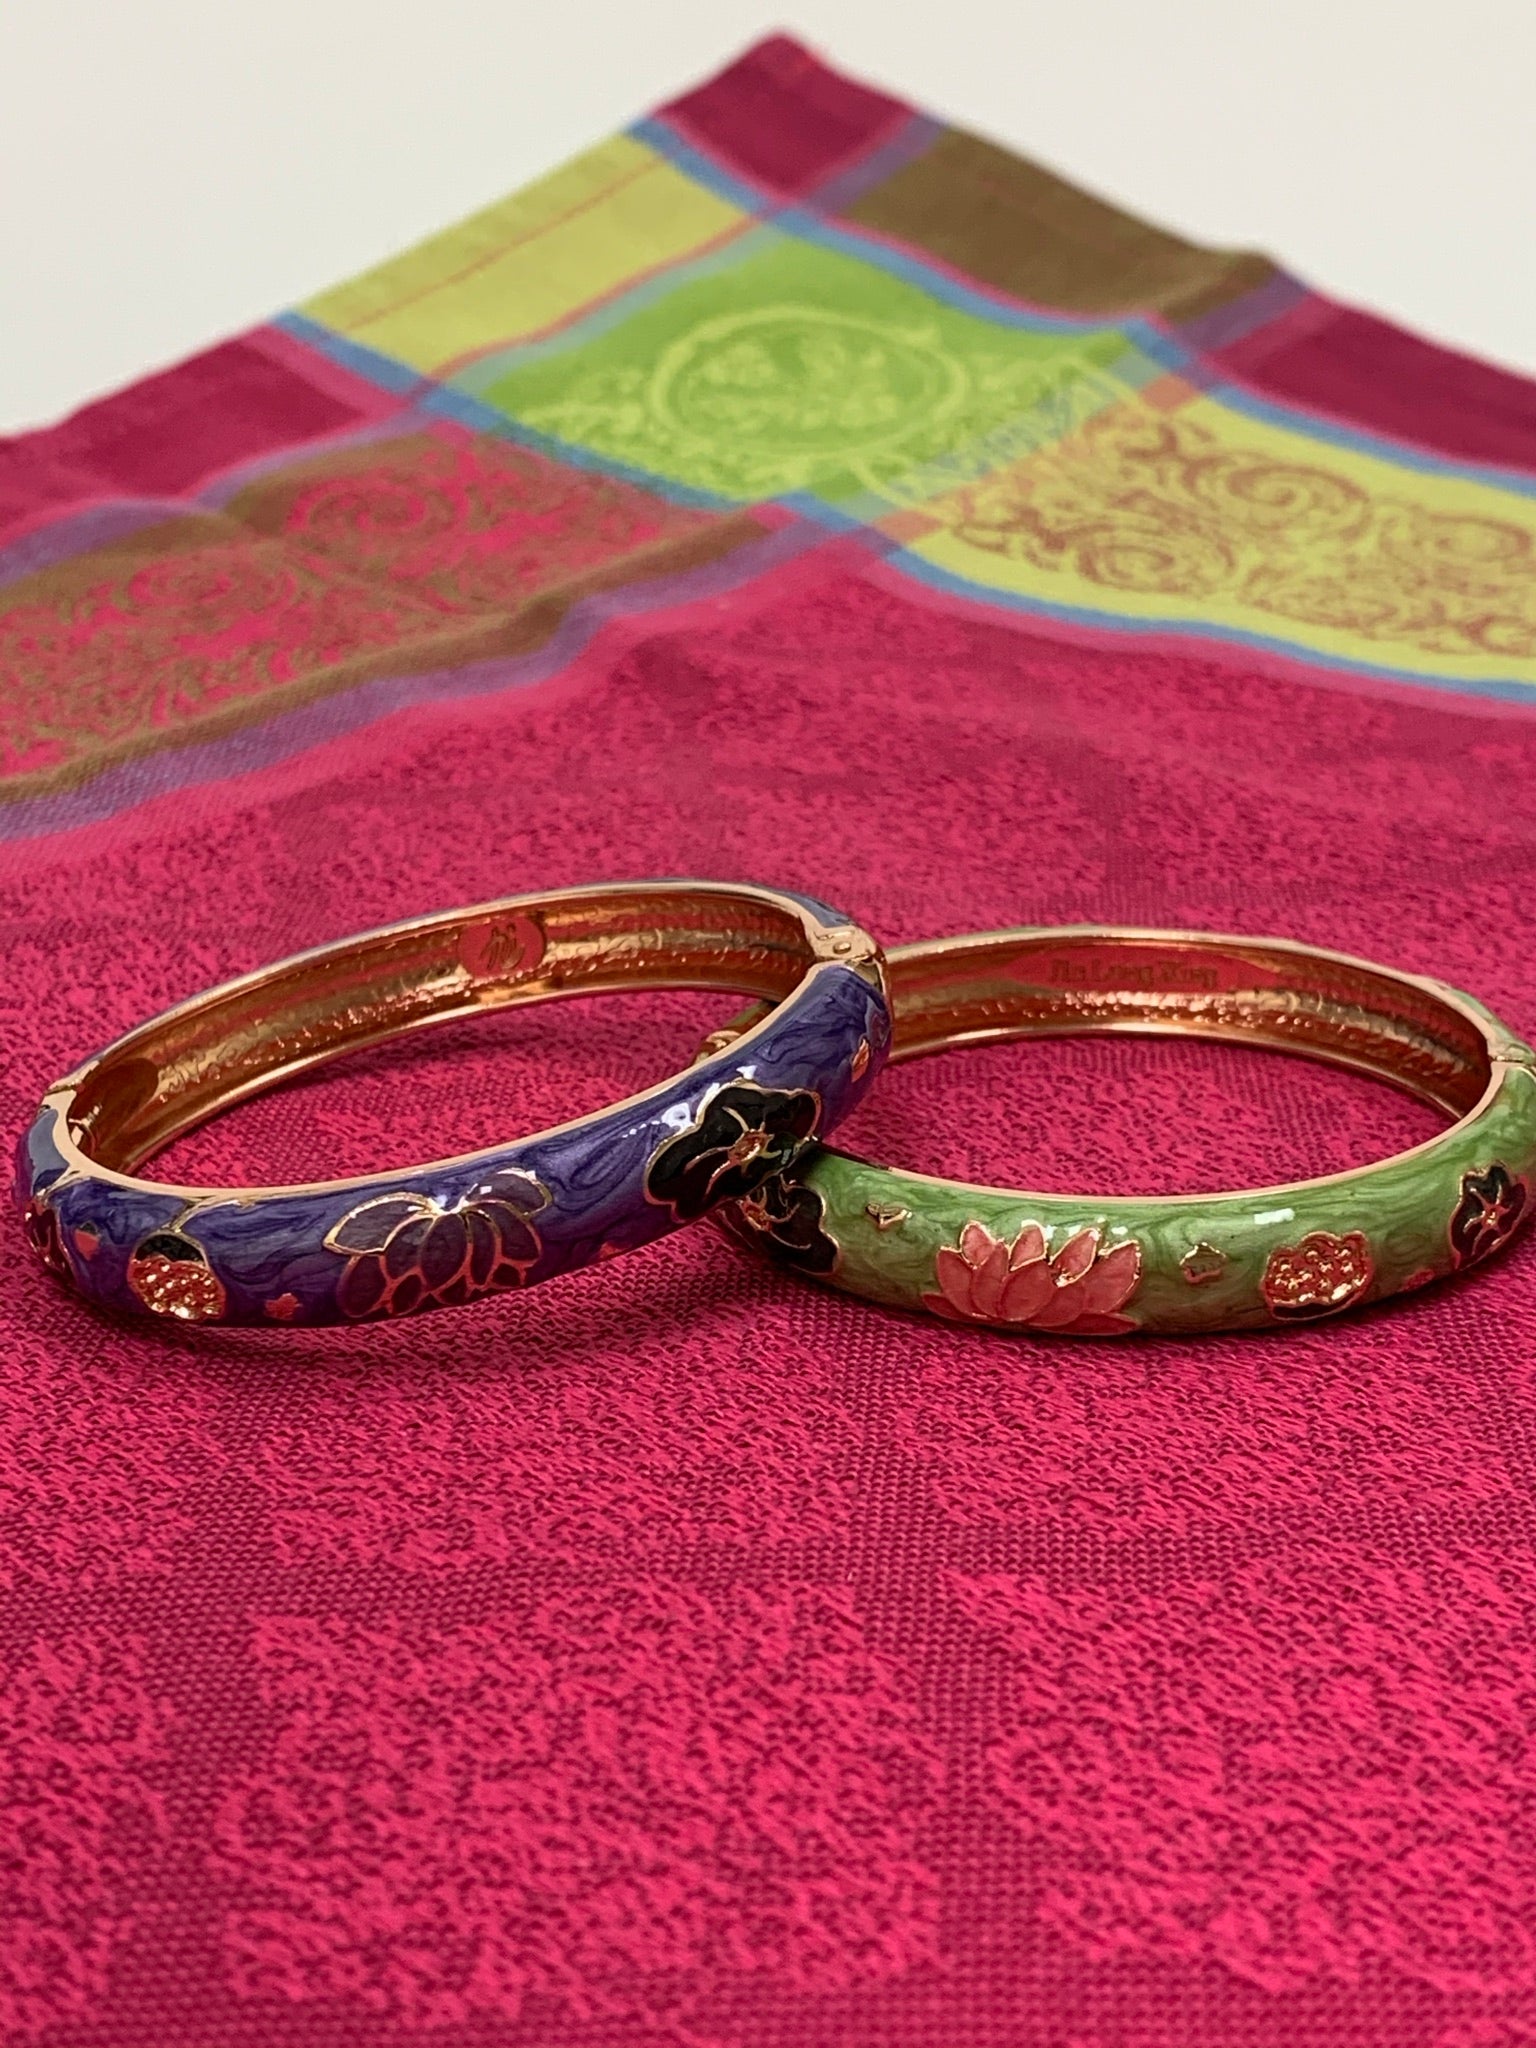 Close-up, both bracelets. Set of 2 beautiful bangle bracelets (purple & green) with intricate metal work and enamel finish. Apparently when enamel is heated up to very high temperatures, it becomes "vibrant in color with a wonderful metallic finish." The design includes lovely lotus flowers. Lotus symbolizes purity, strength and enlightenment and reminds us that we all must move through the muck to reach the light ♥. See the other set in my store (black & red).